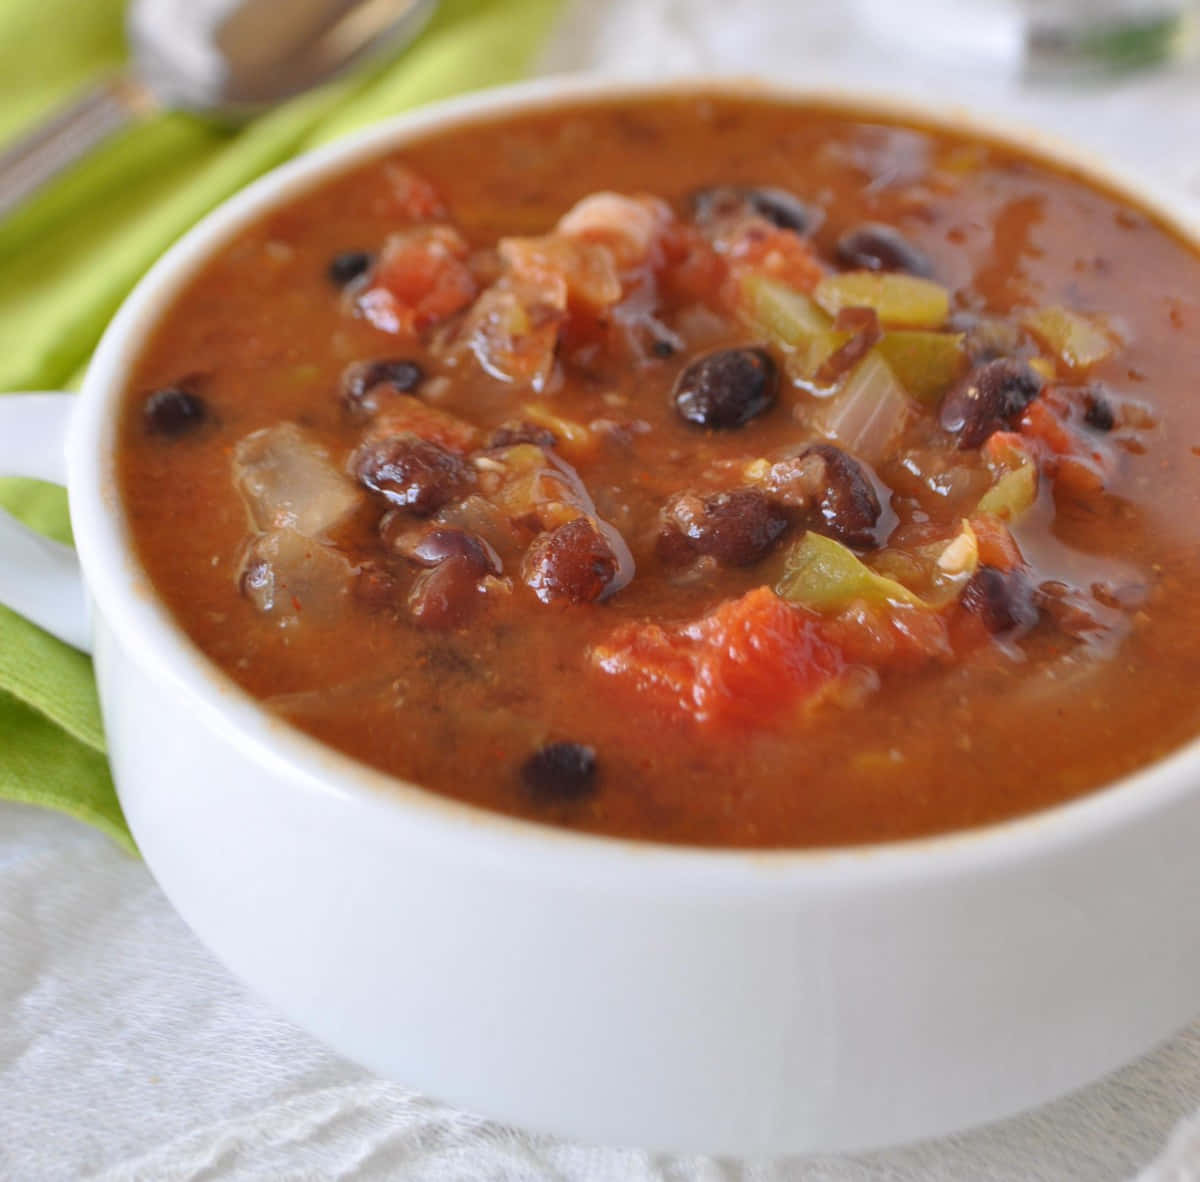 Warm and delicious black bean soup to tantalize your taste buds!" Wallpaper